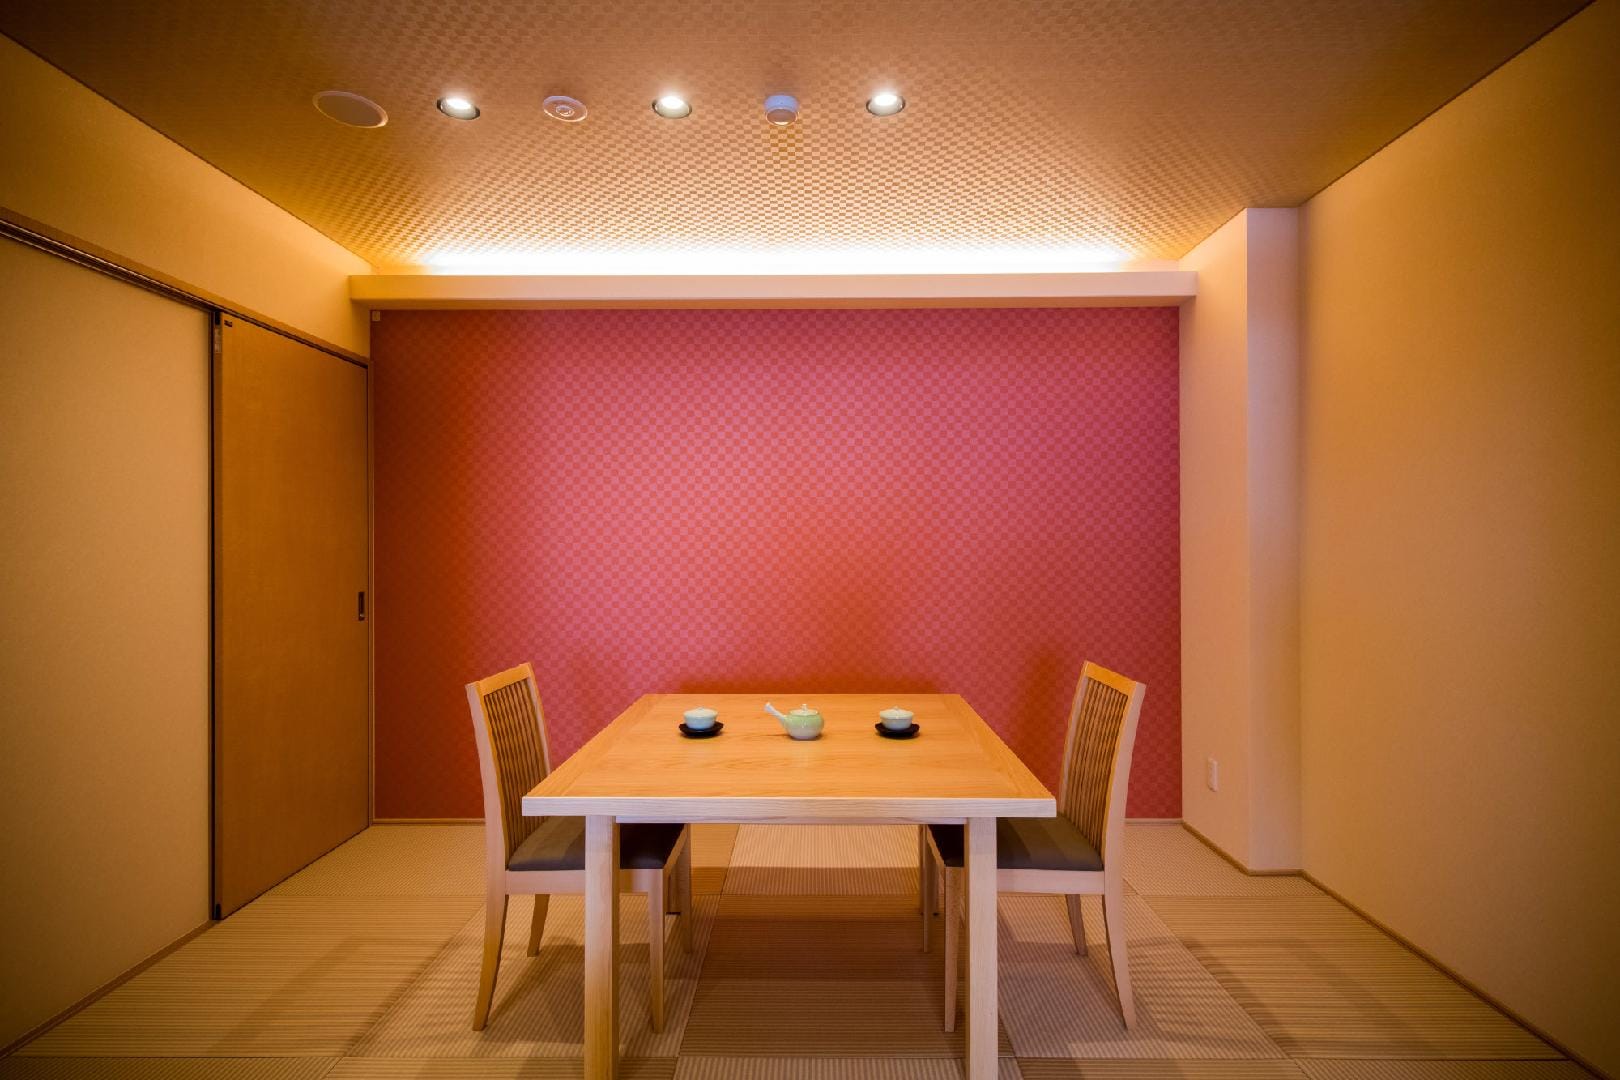 ◆ Guest room Dining room ◆ 55.8 square meters